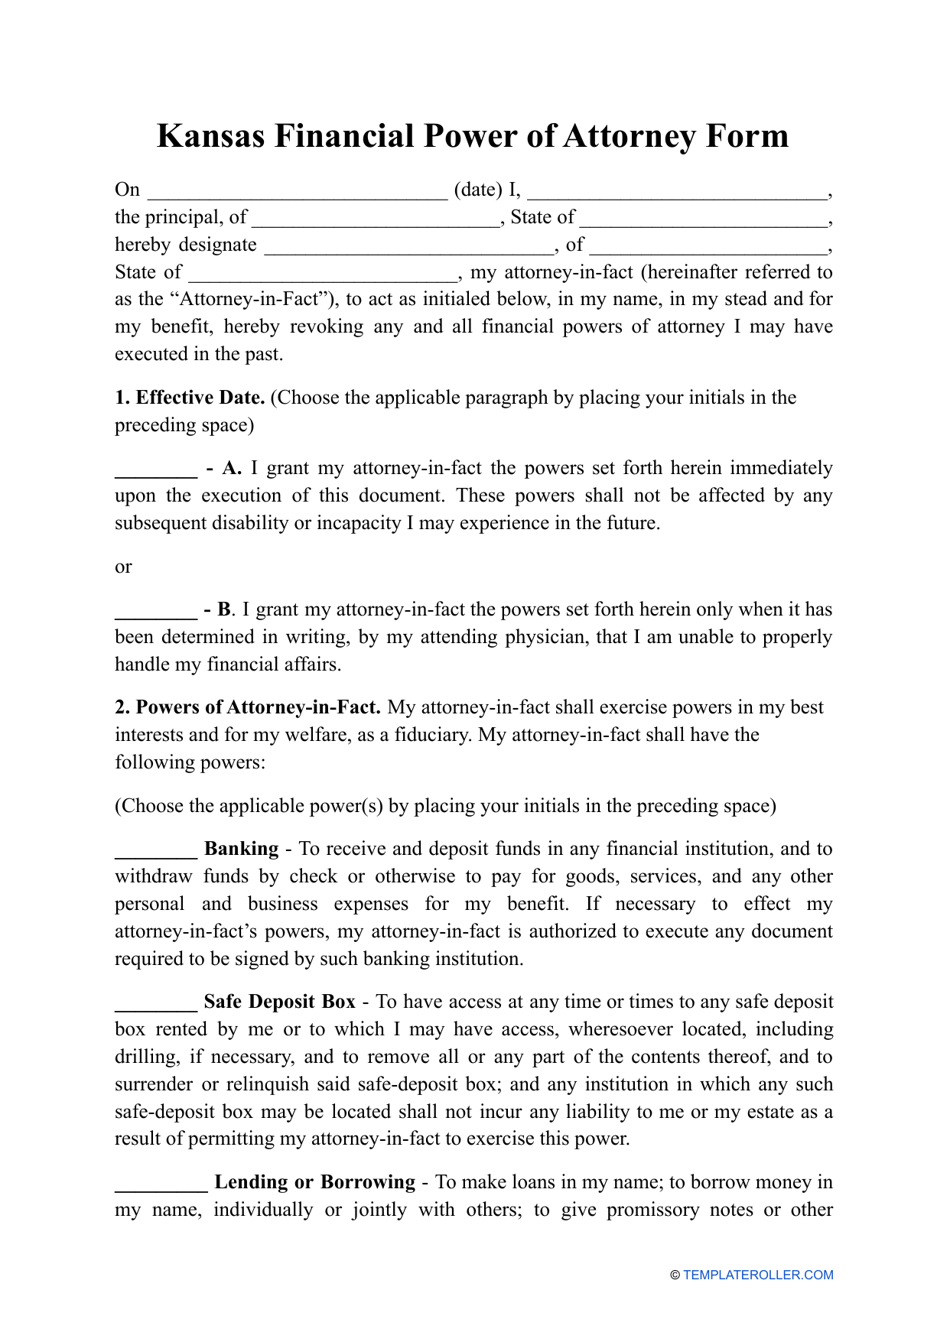 Financial Power of Attorney Form - Kansas, Page 1